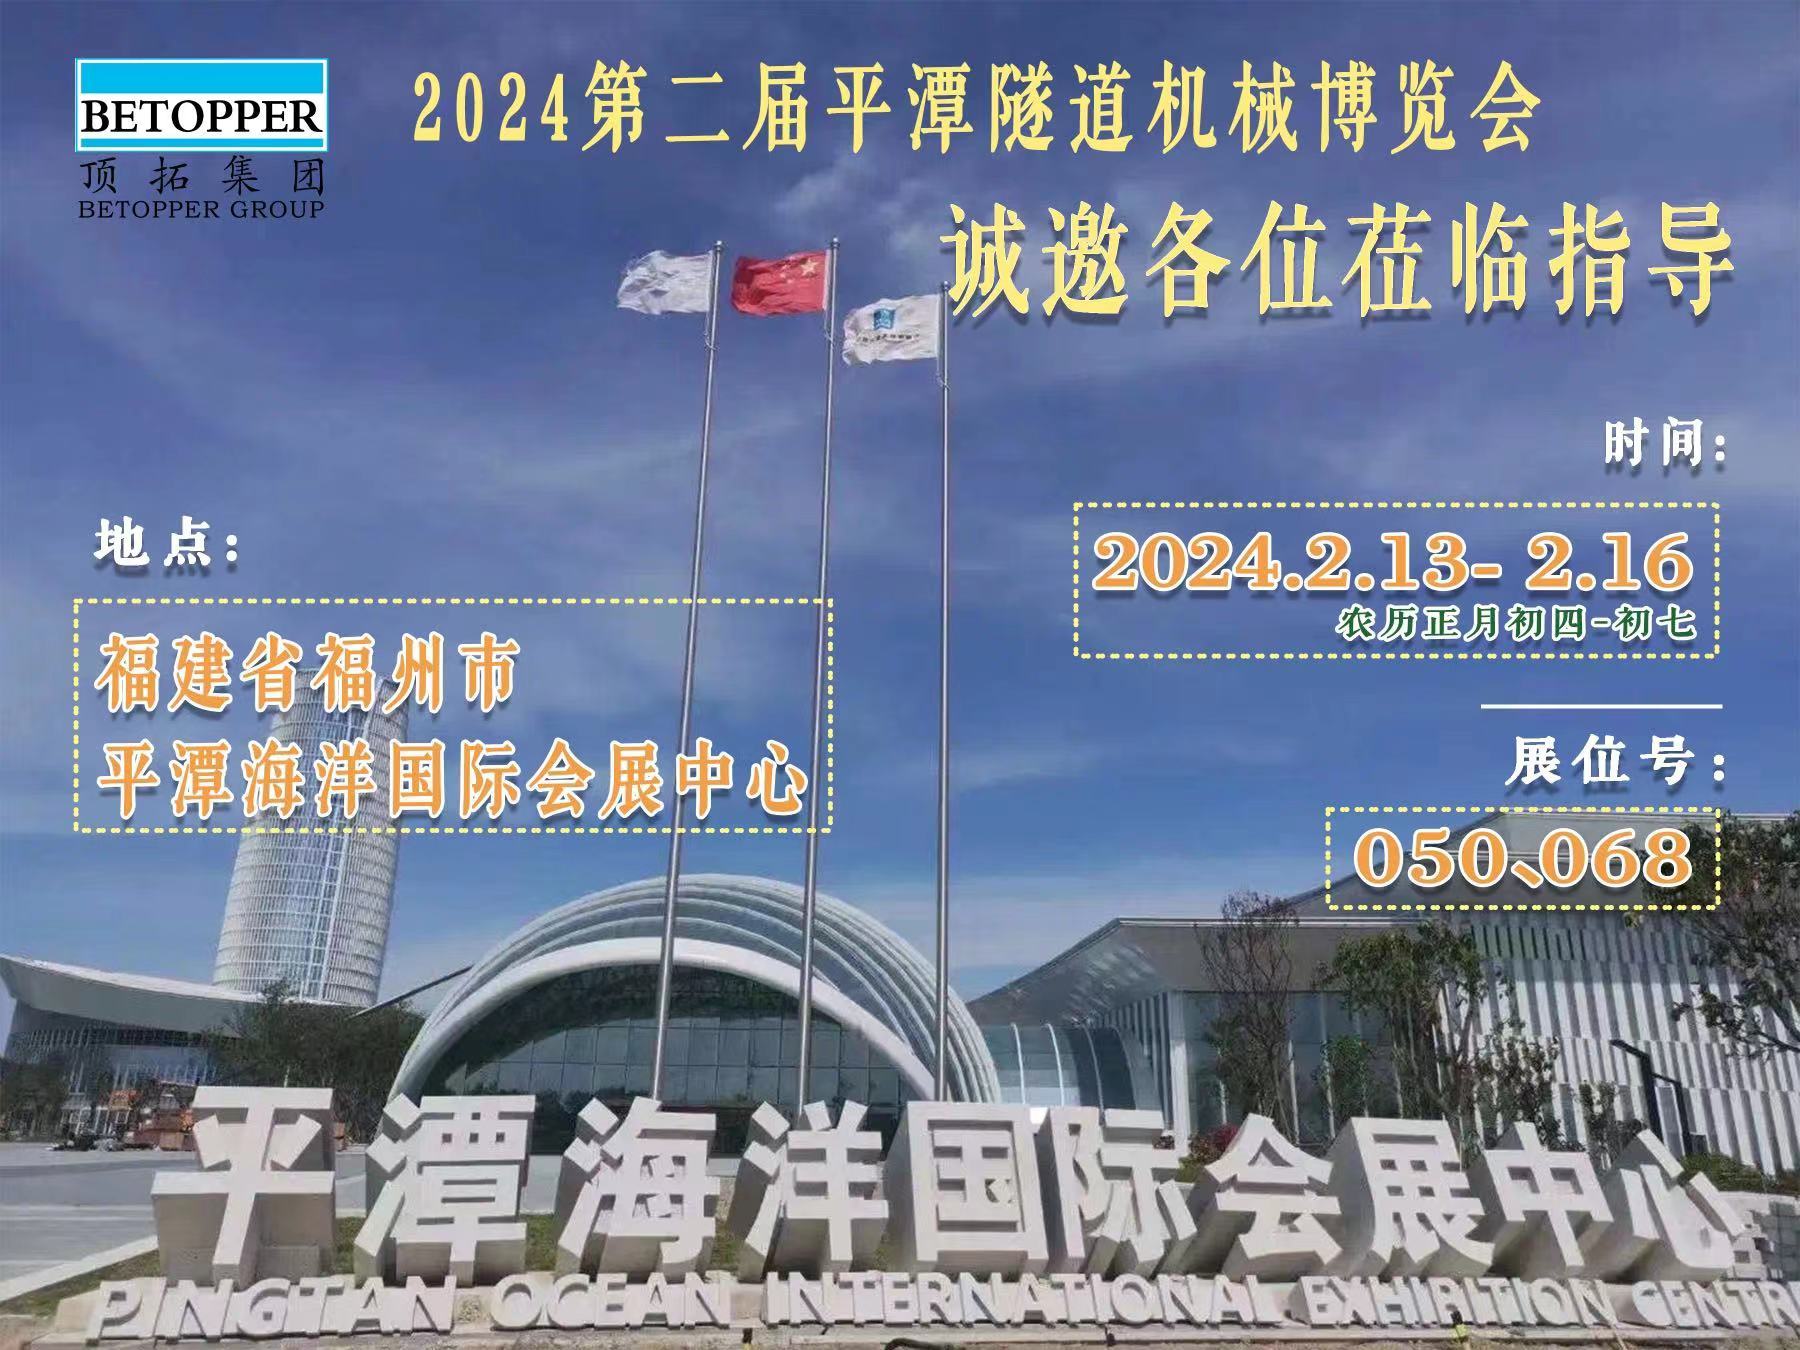 The Second Pingtan Tunnel Machinery Industry Expo